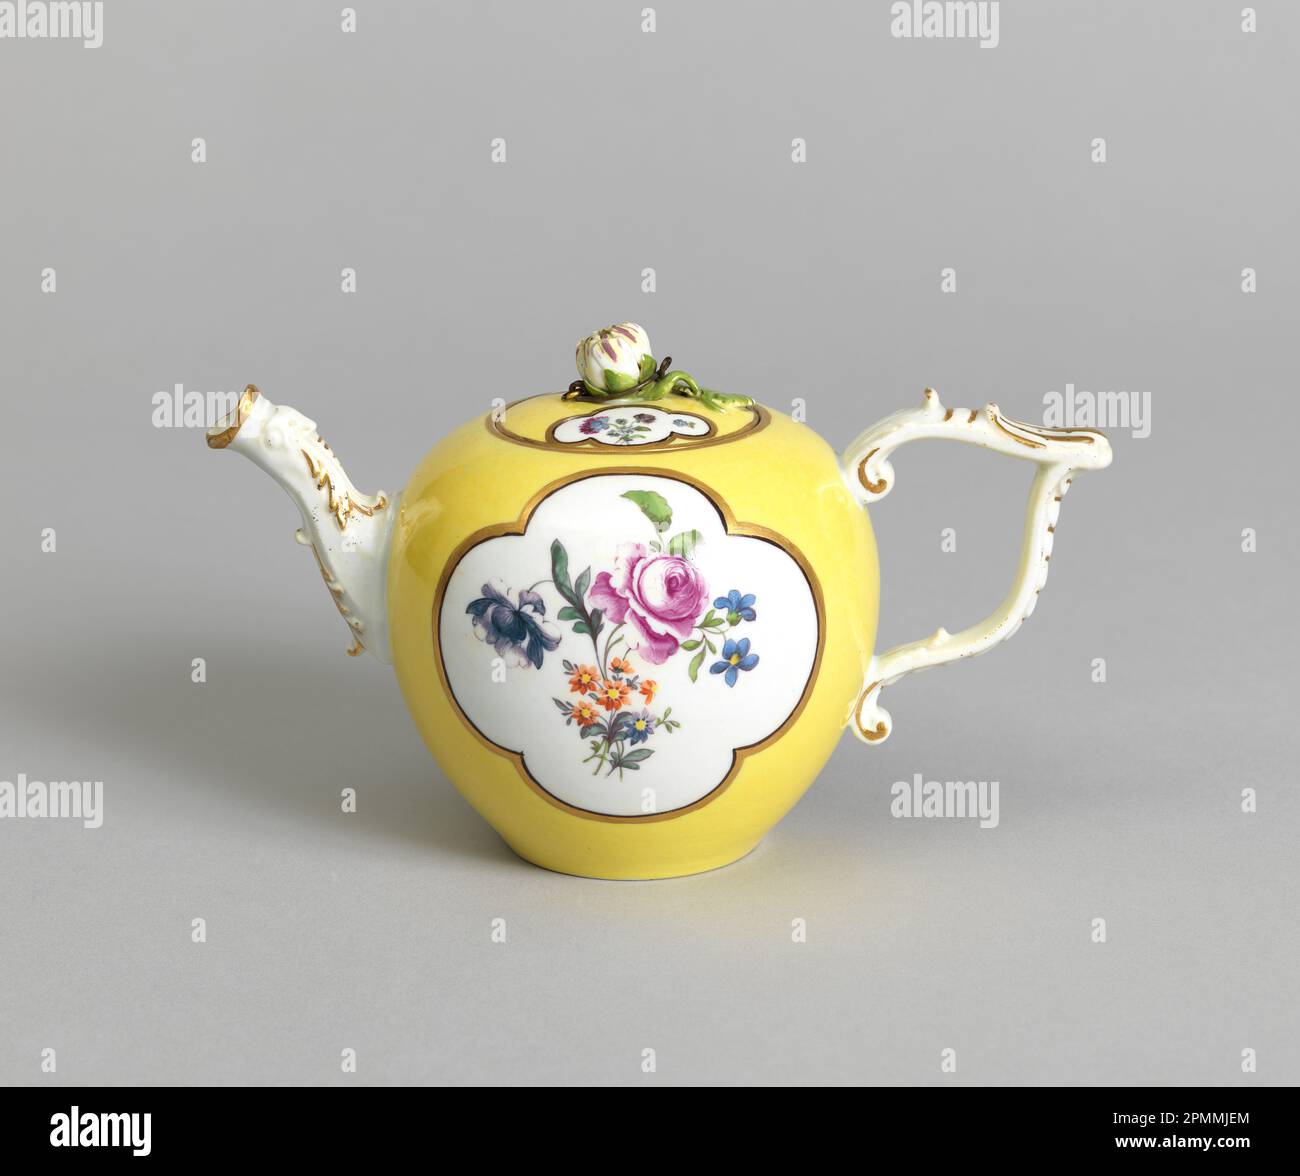 Teapot Teapot; Manufactured by Meissen Porcelain Factory (Germany), Meissen Porcelain Manufactory (Germany); Germany; hard paste porcelain, vitreous enamel, gold Stock Photo